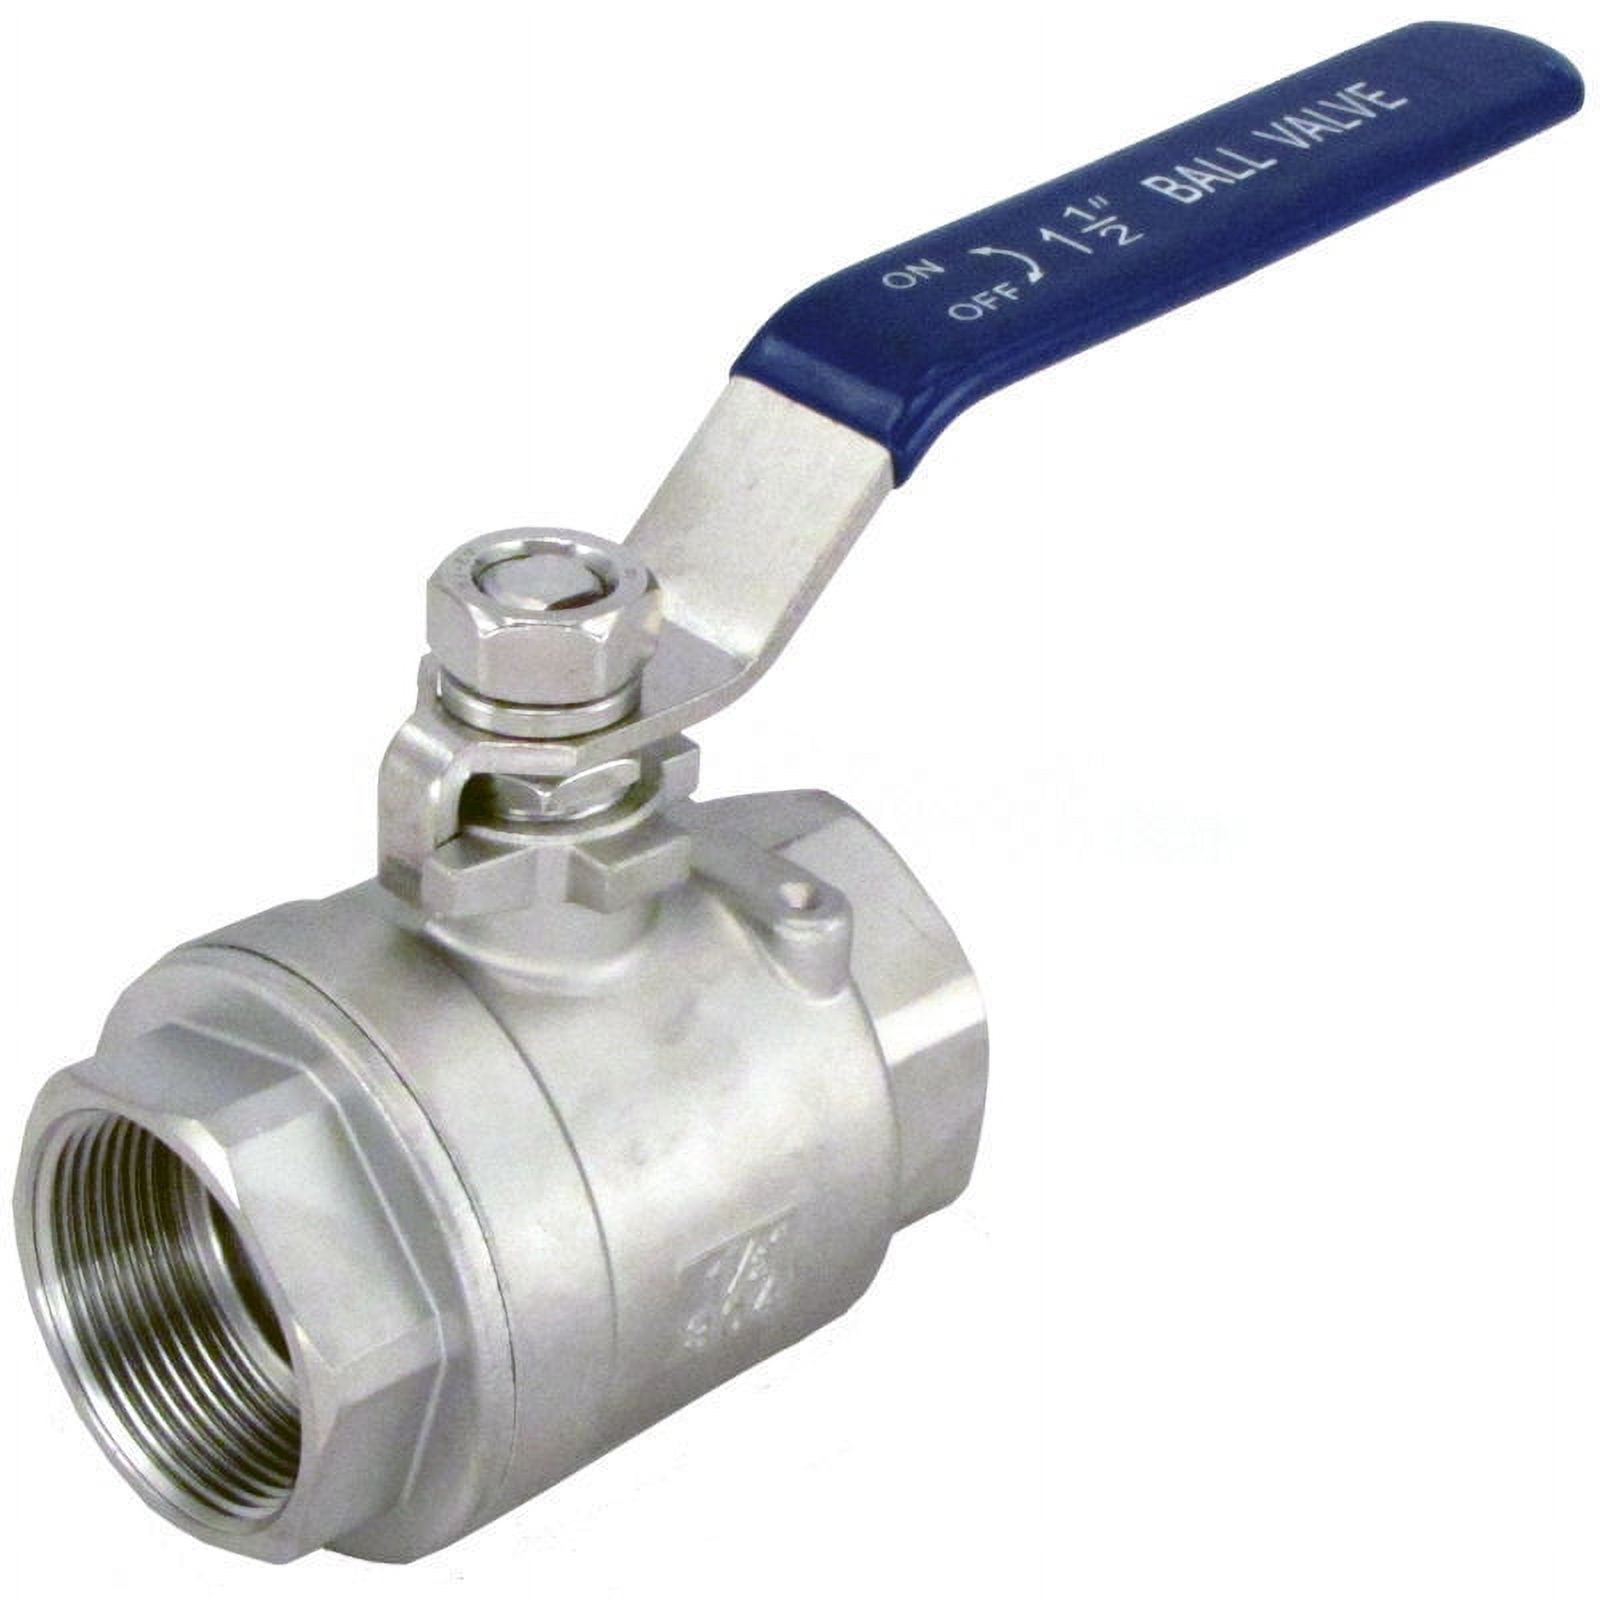 1-1/2quot; Apollo 86R-207-01 Ball Valve Socketweld Ends, Full Port  Stainless Steel